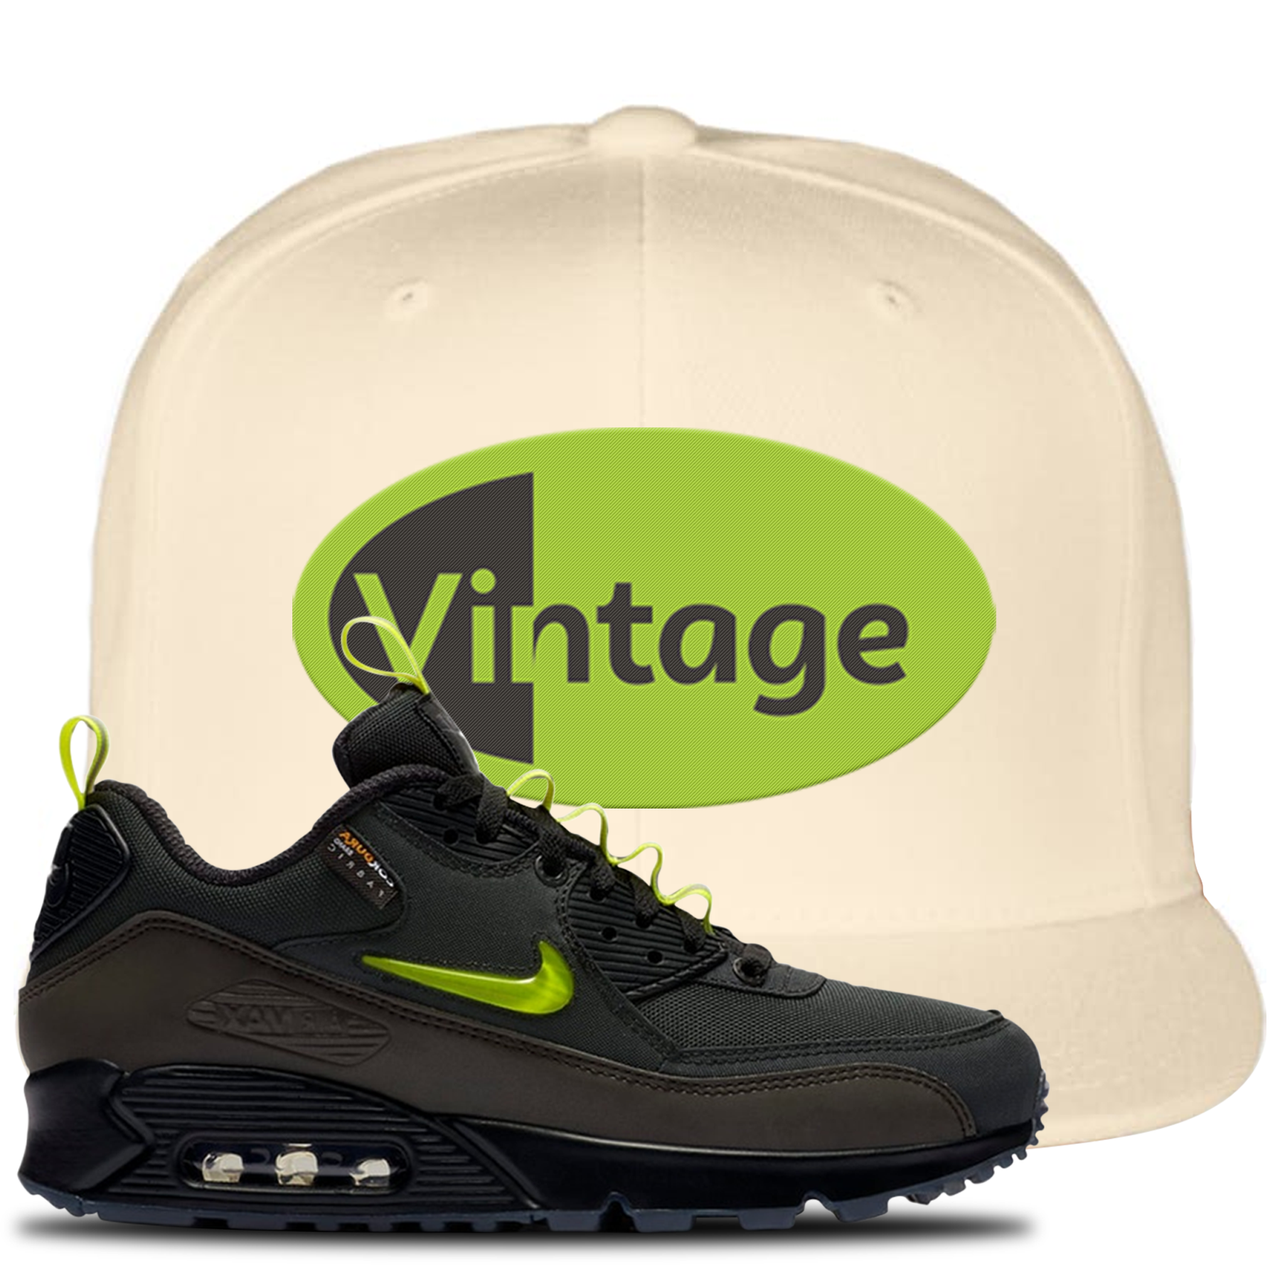 The Basement X Air Max 90 Manchester Vintage Oval White Sneaker Hook Up Snapback Hat